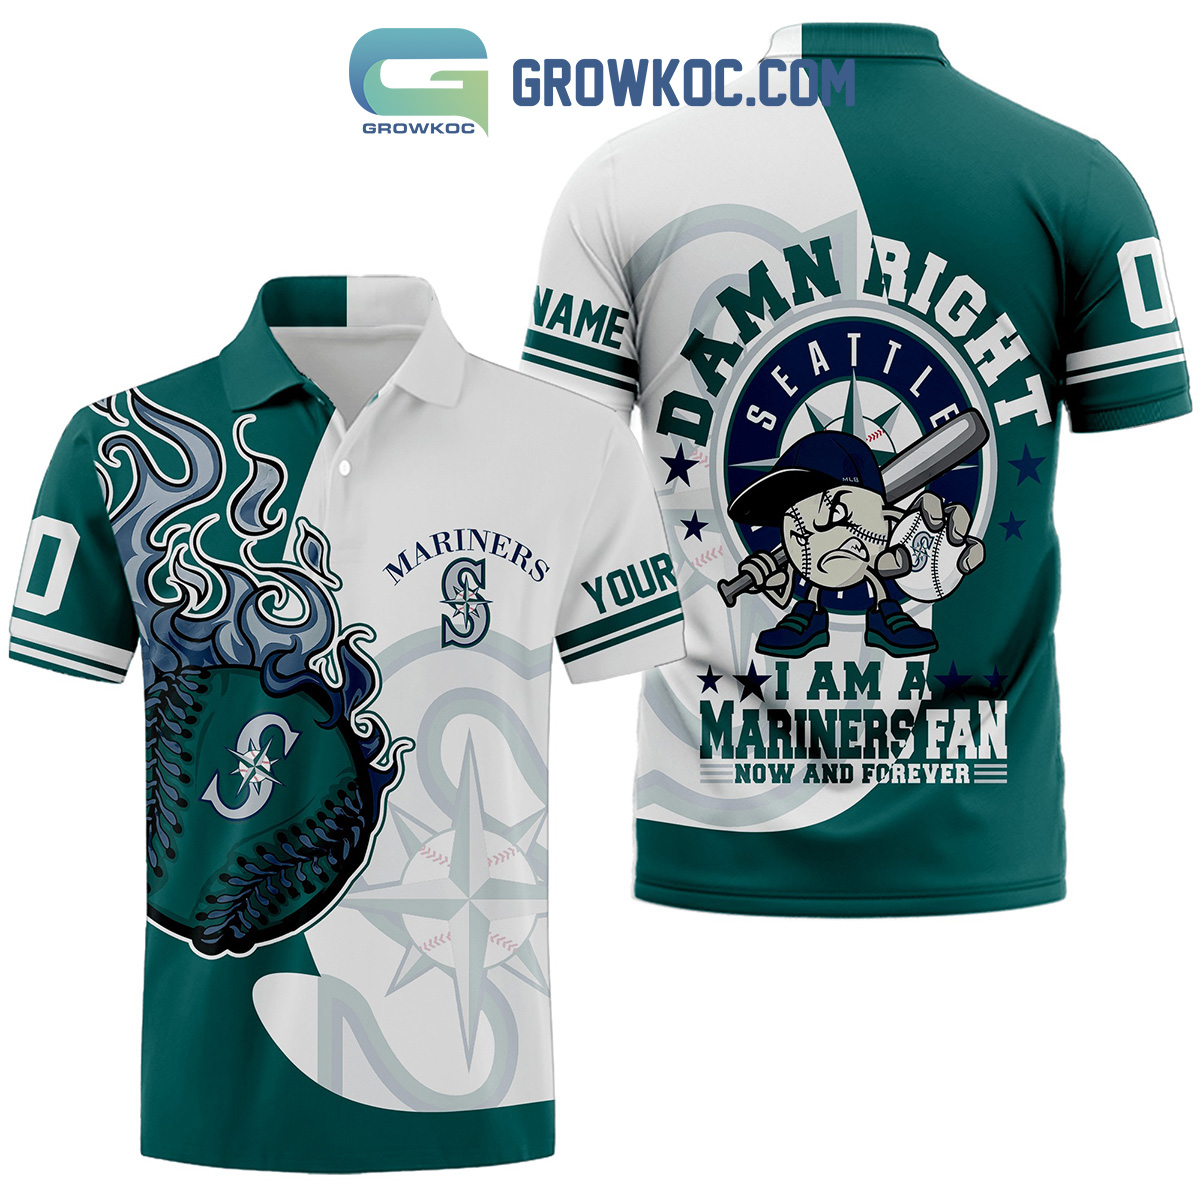 Seattle Mariners MLB Personalized Hunting Camouflage Hoodie T Shirt -  Growkoc